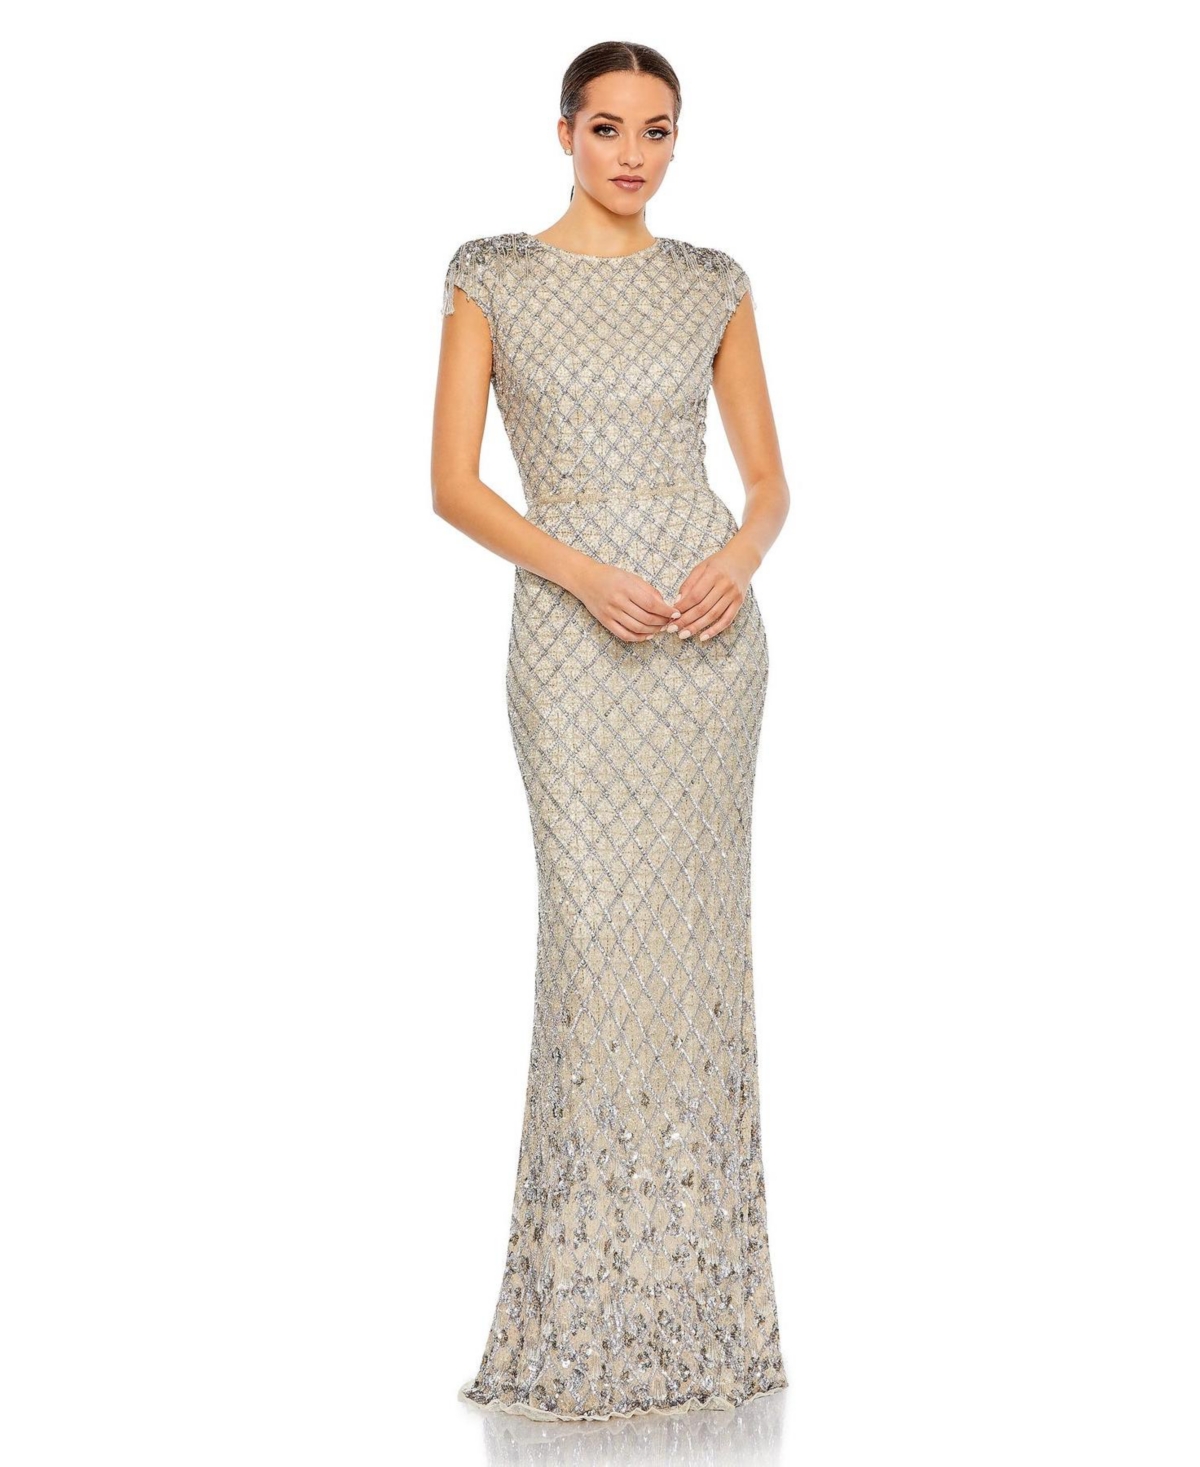 Women's Embellished Crystal Cap Sleeve Column Gown - Silver nude